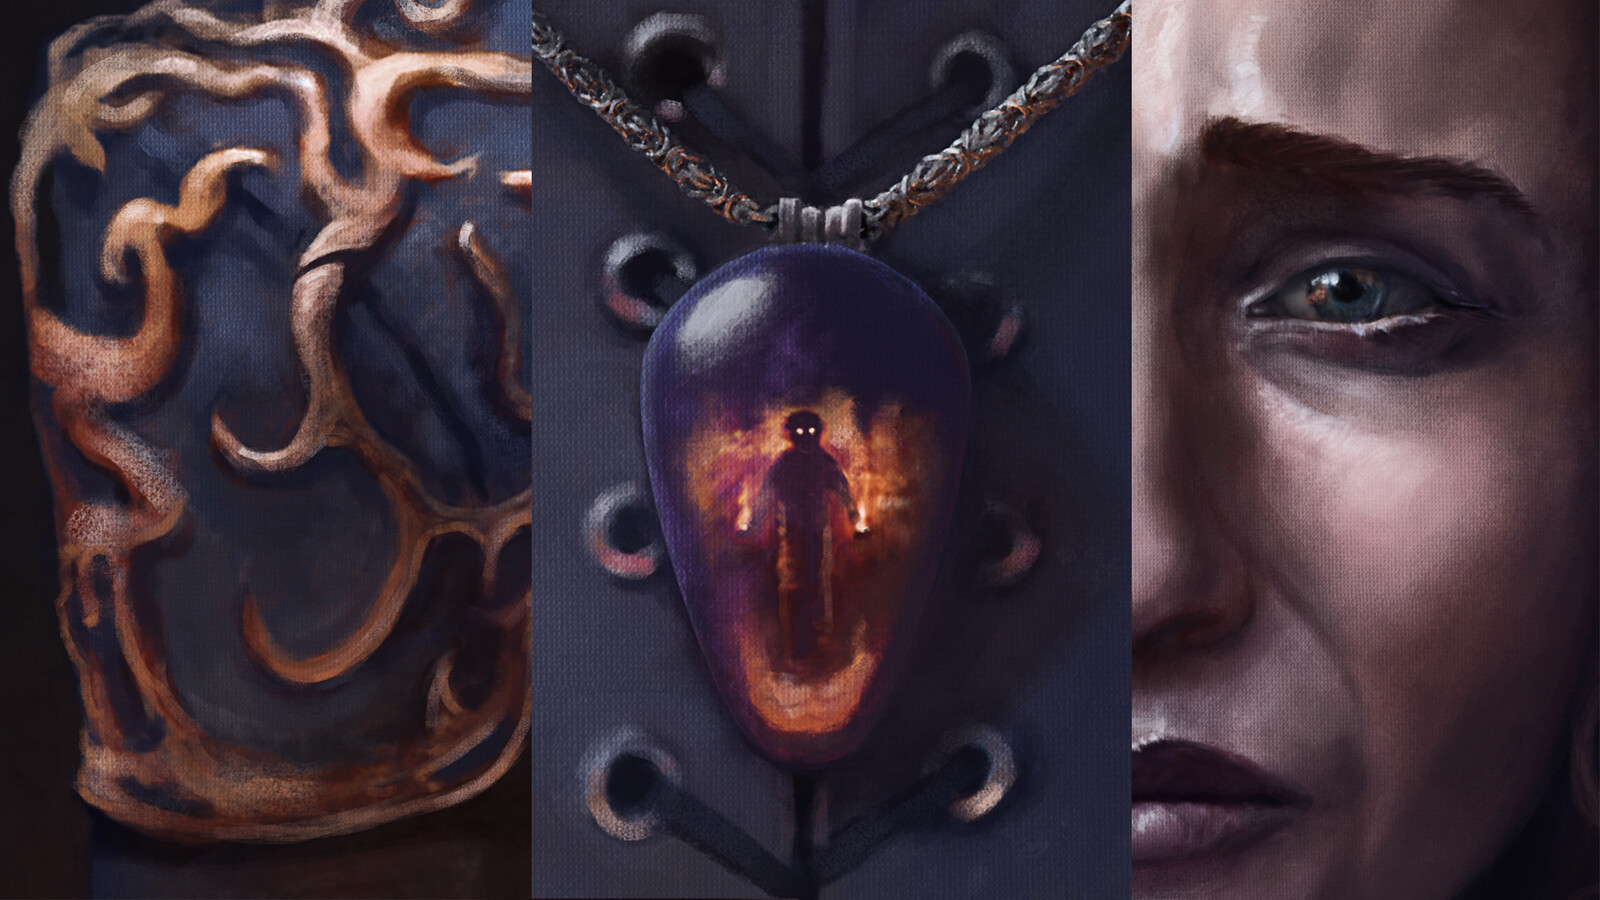 Some crops of the painting. Tried adding a bit of "realism" with a canvas overlay. Not sure if I like it yet, haha.